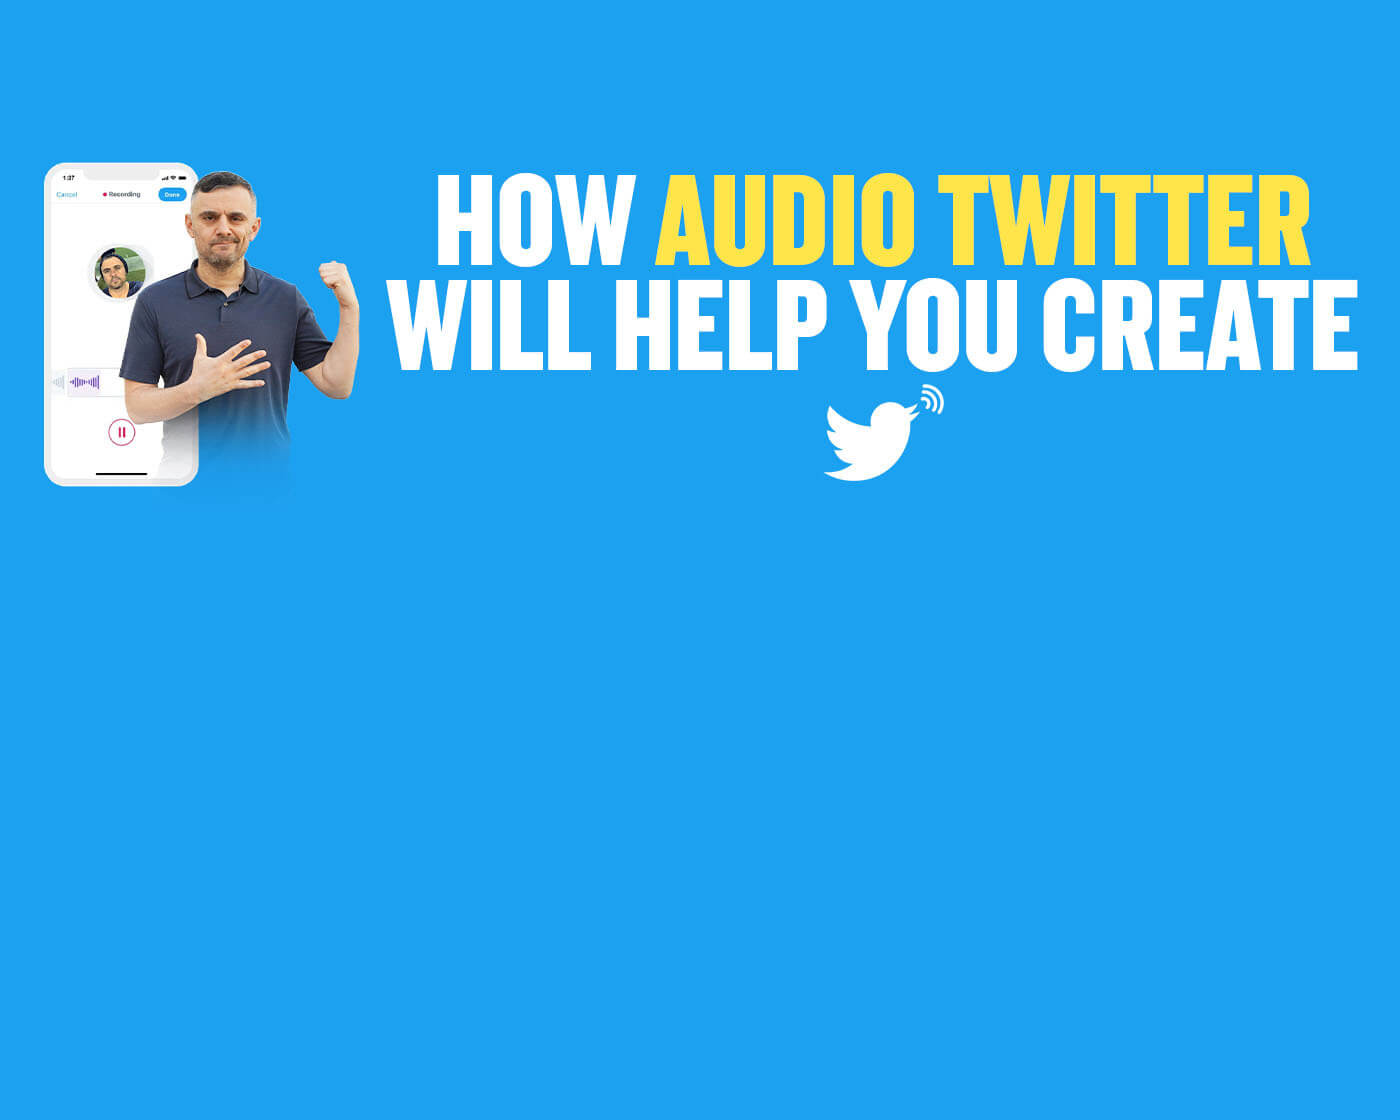 How Audio Twitter Can Help You Create